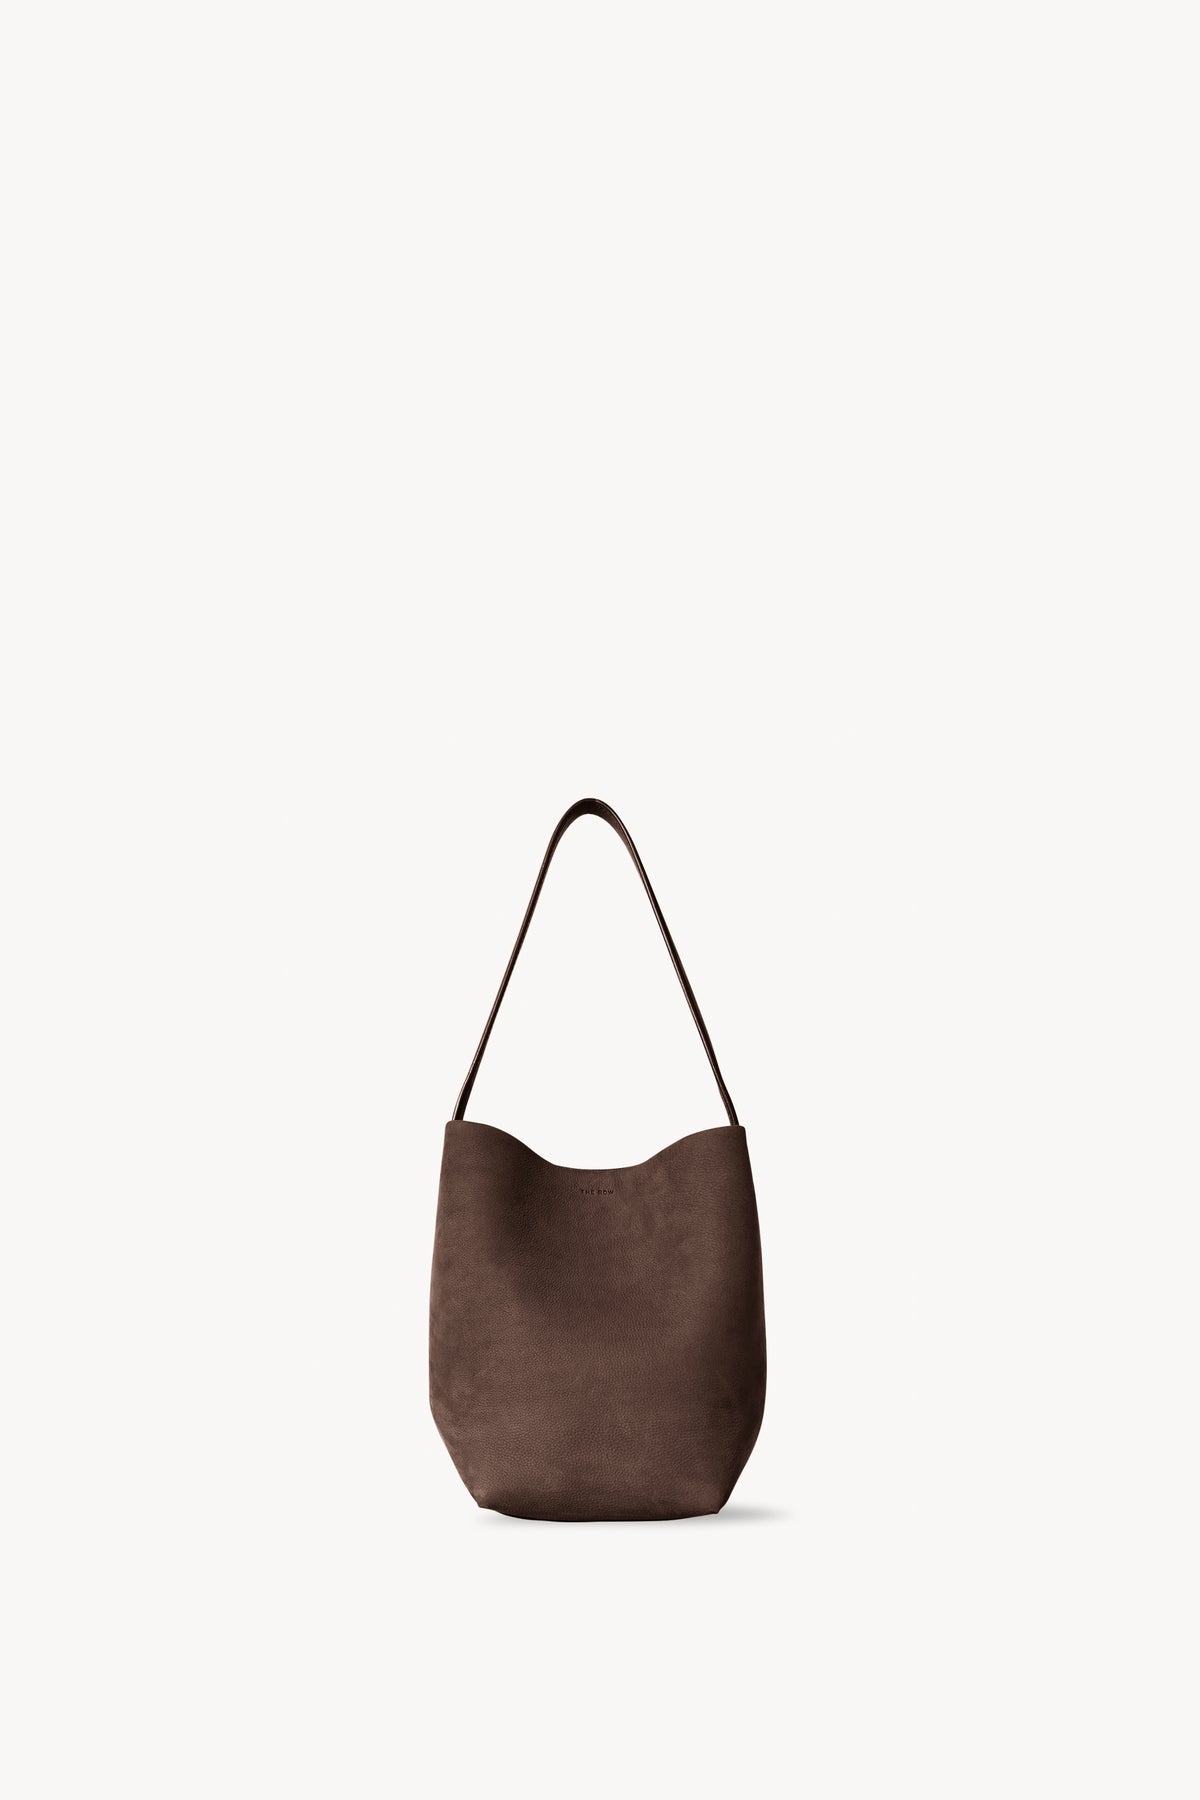 The Row - Small N/S Park Tote in Leather - Cognac - One Size